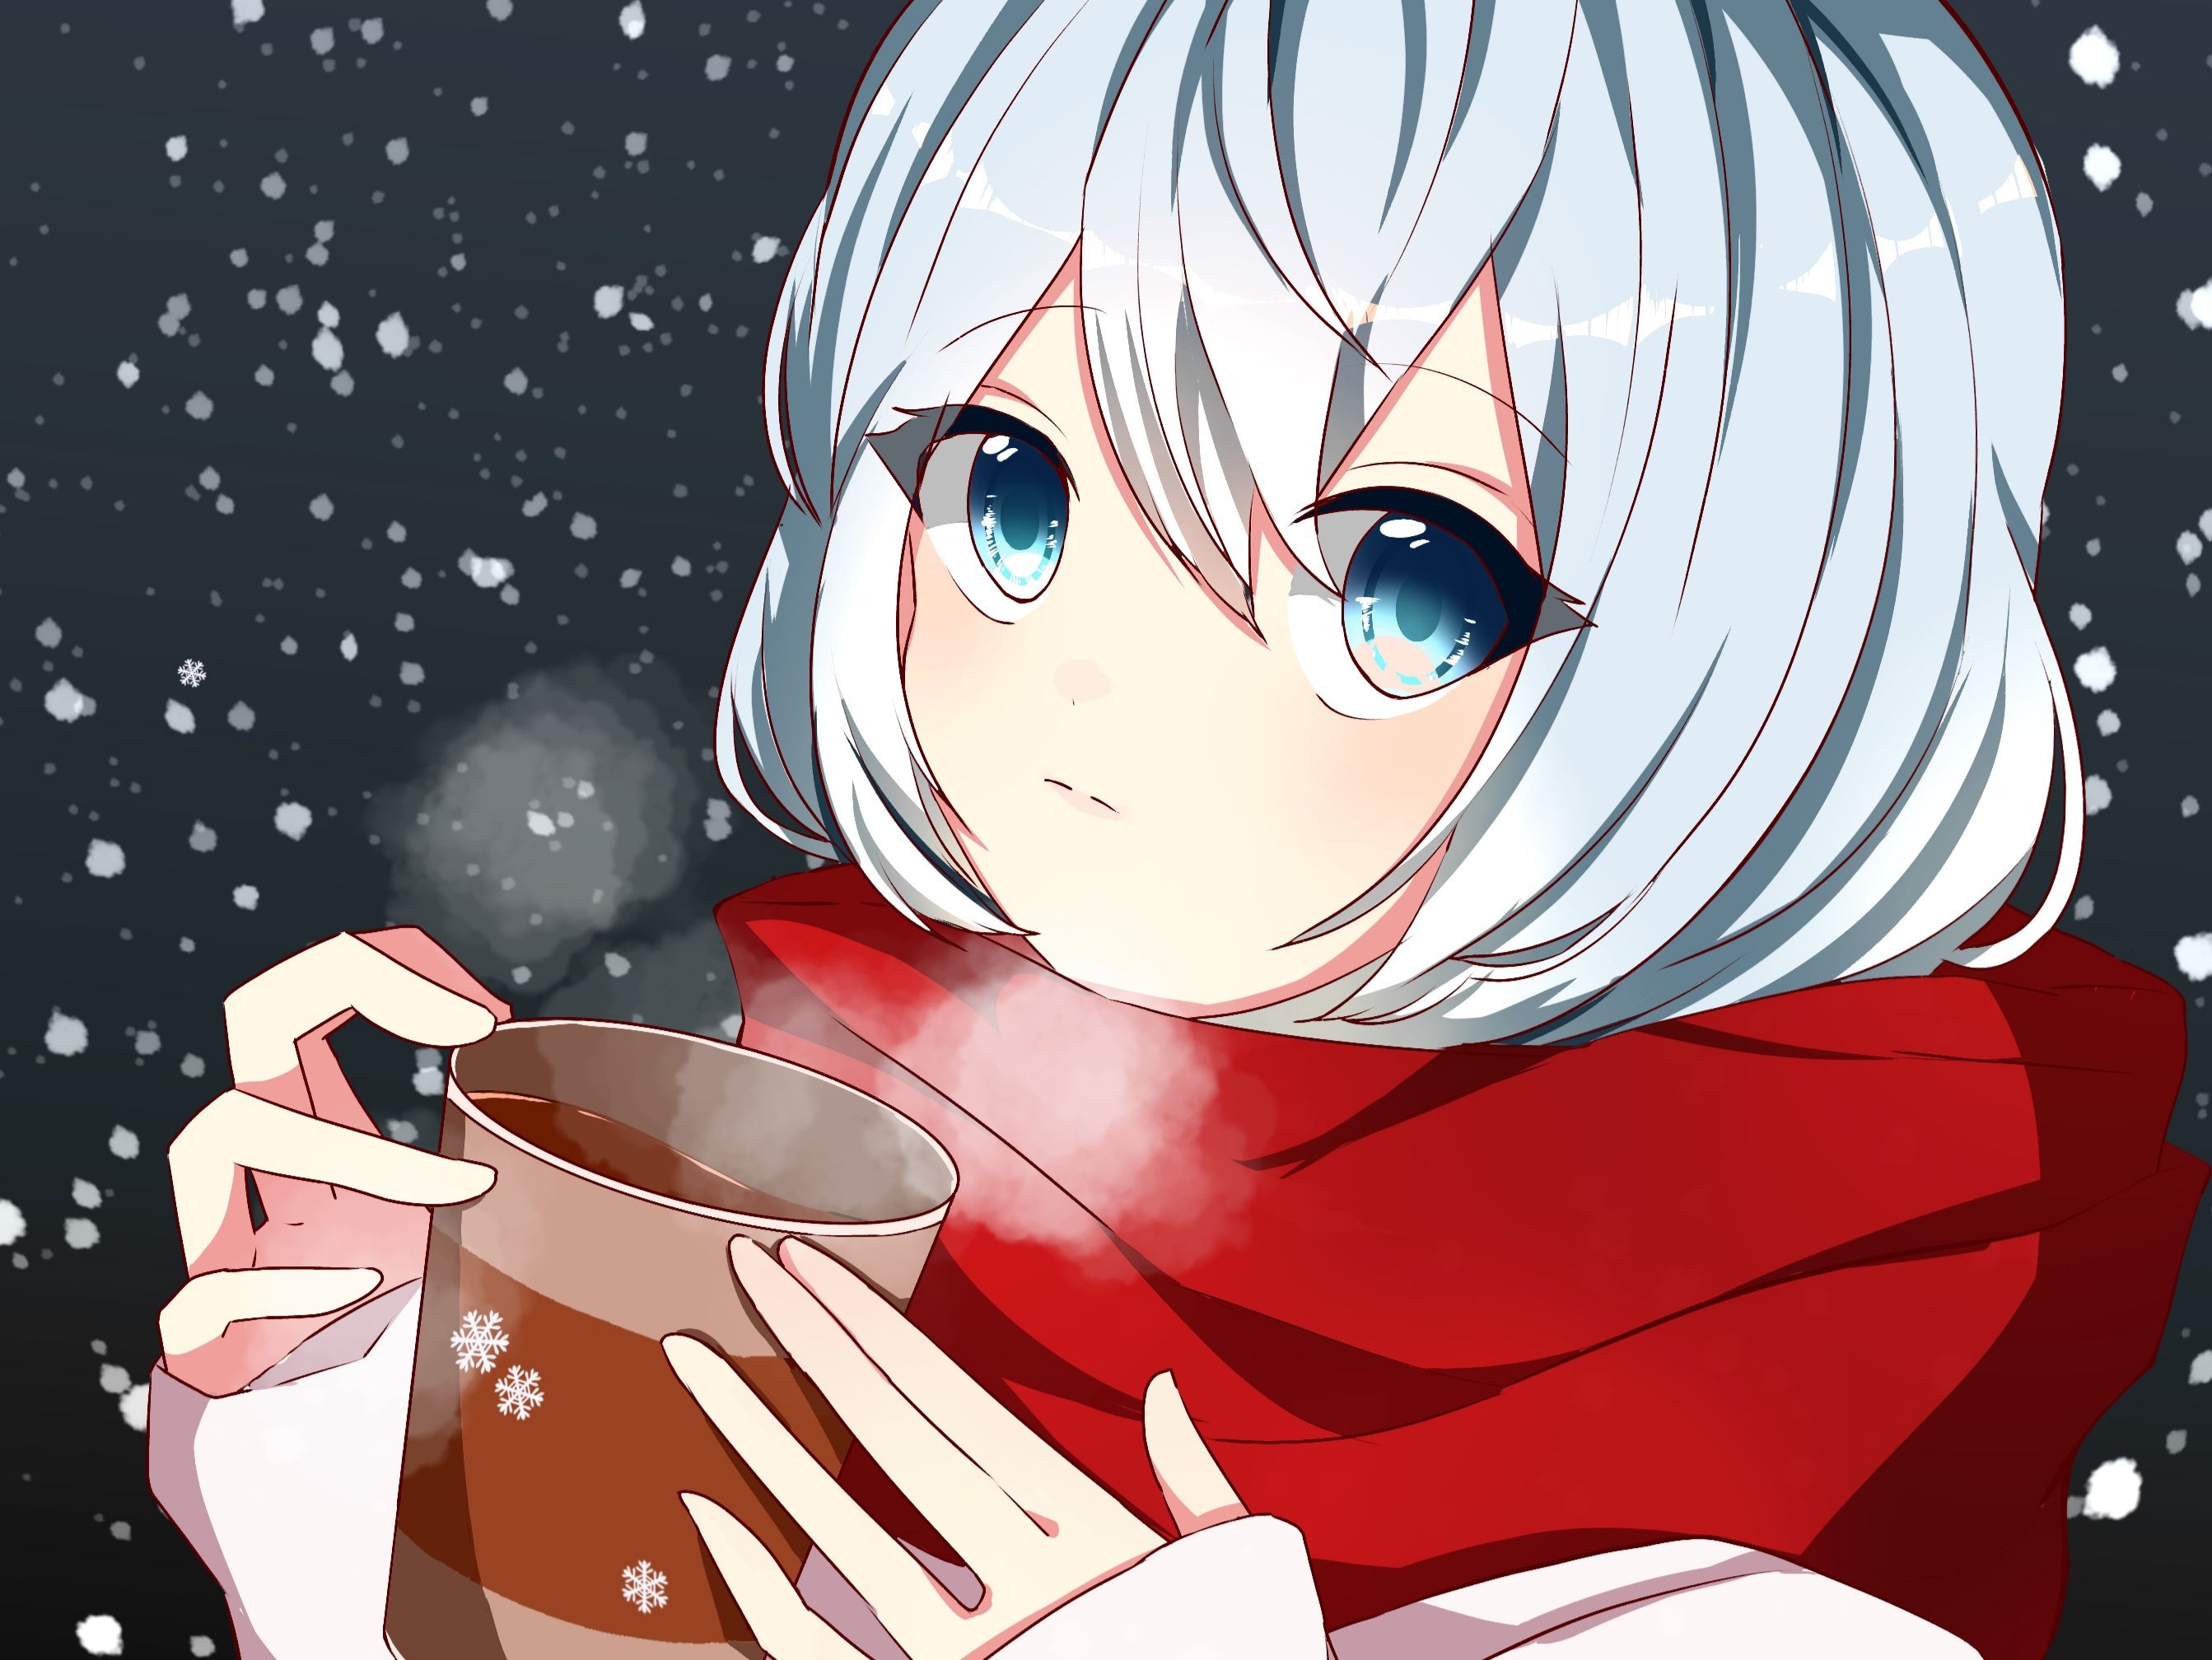 Anime girl drinking hot chocolate on a cold snowy night HD